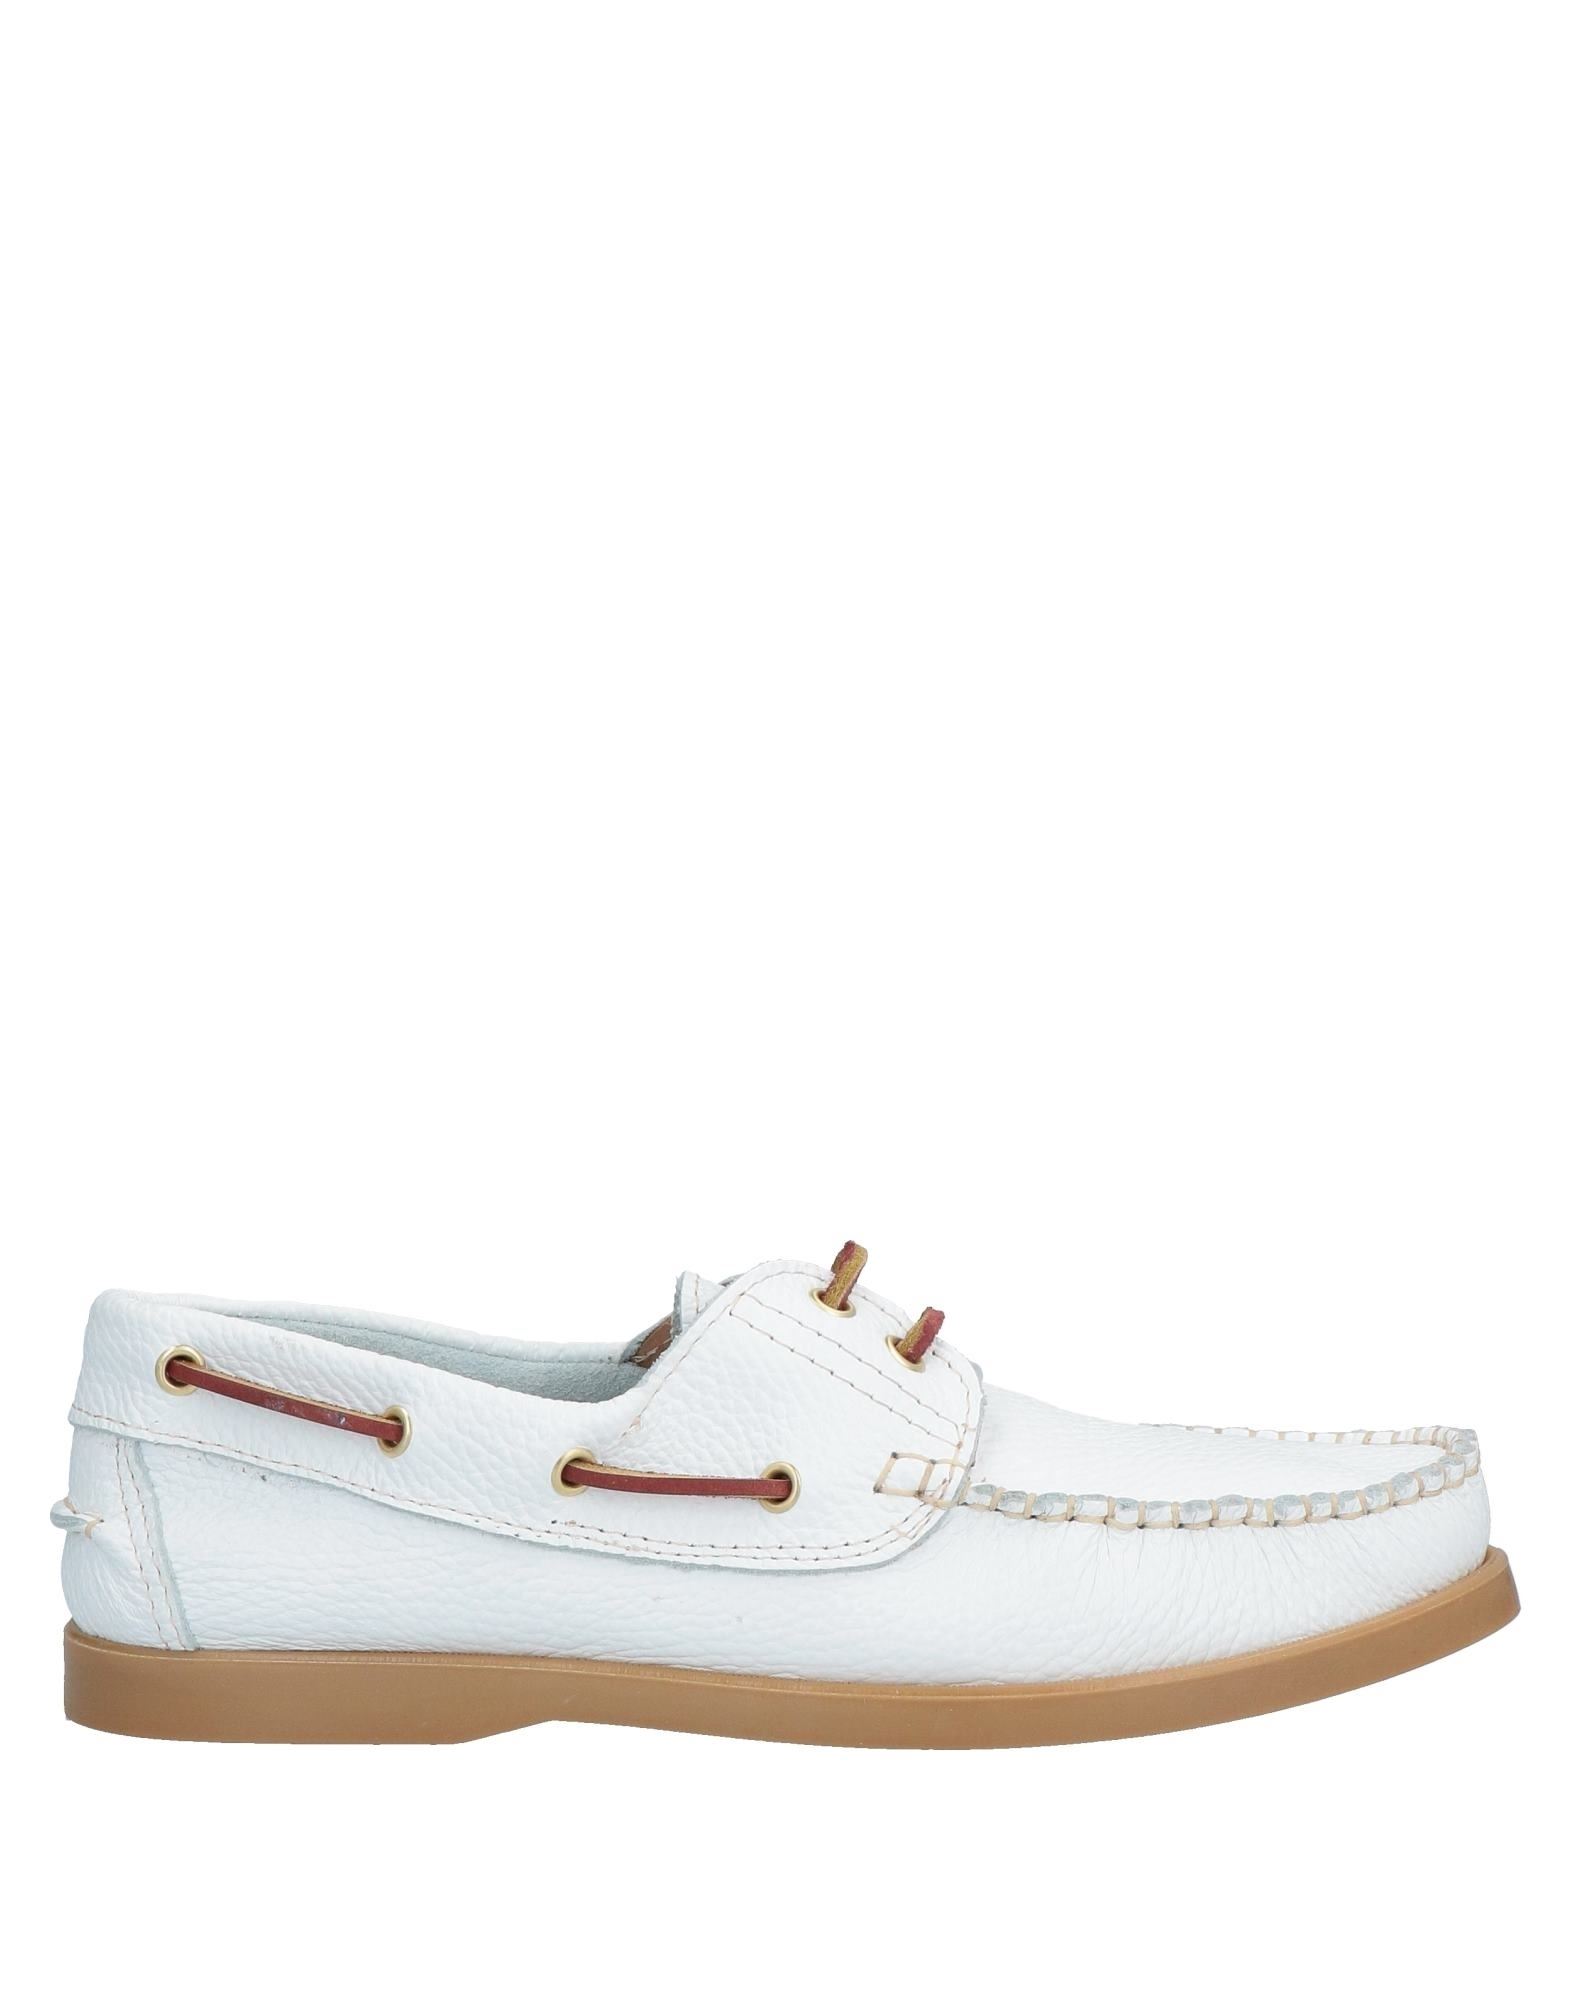 Angelo Pallotta Loafers In White